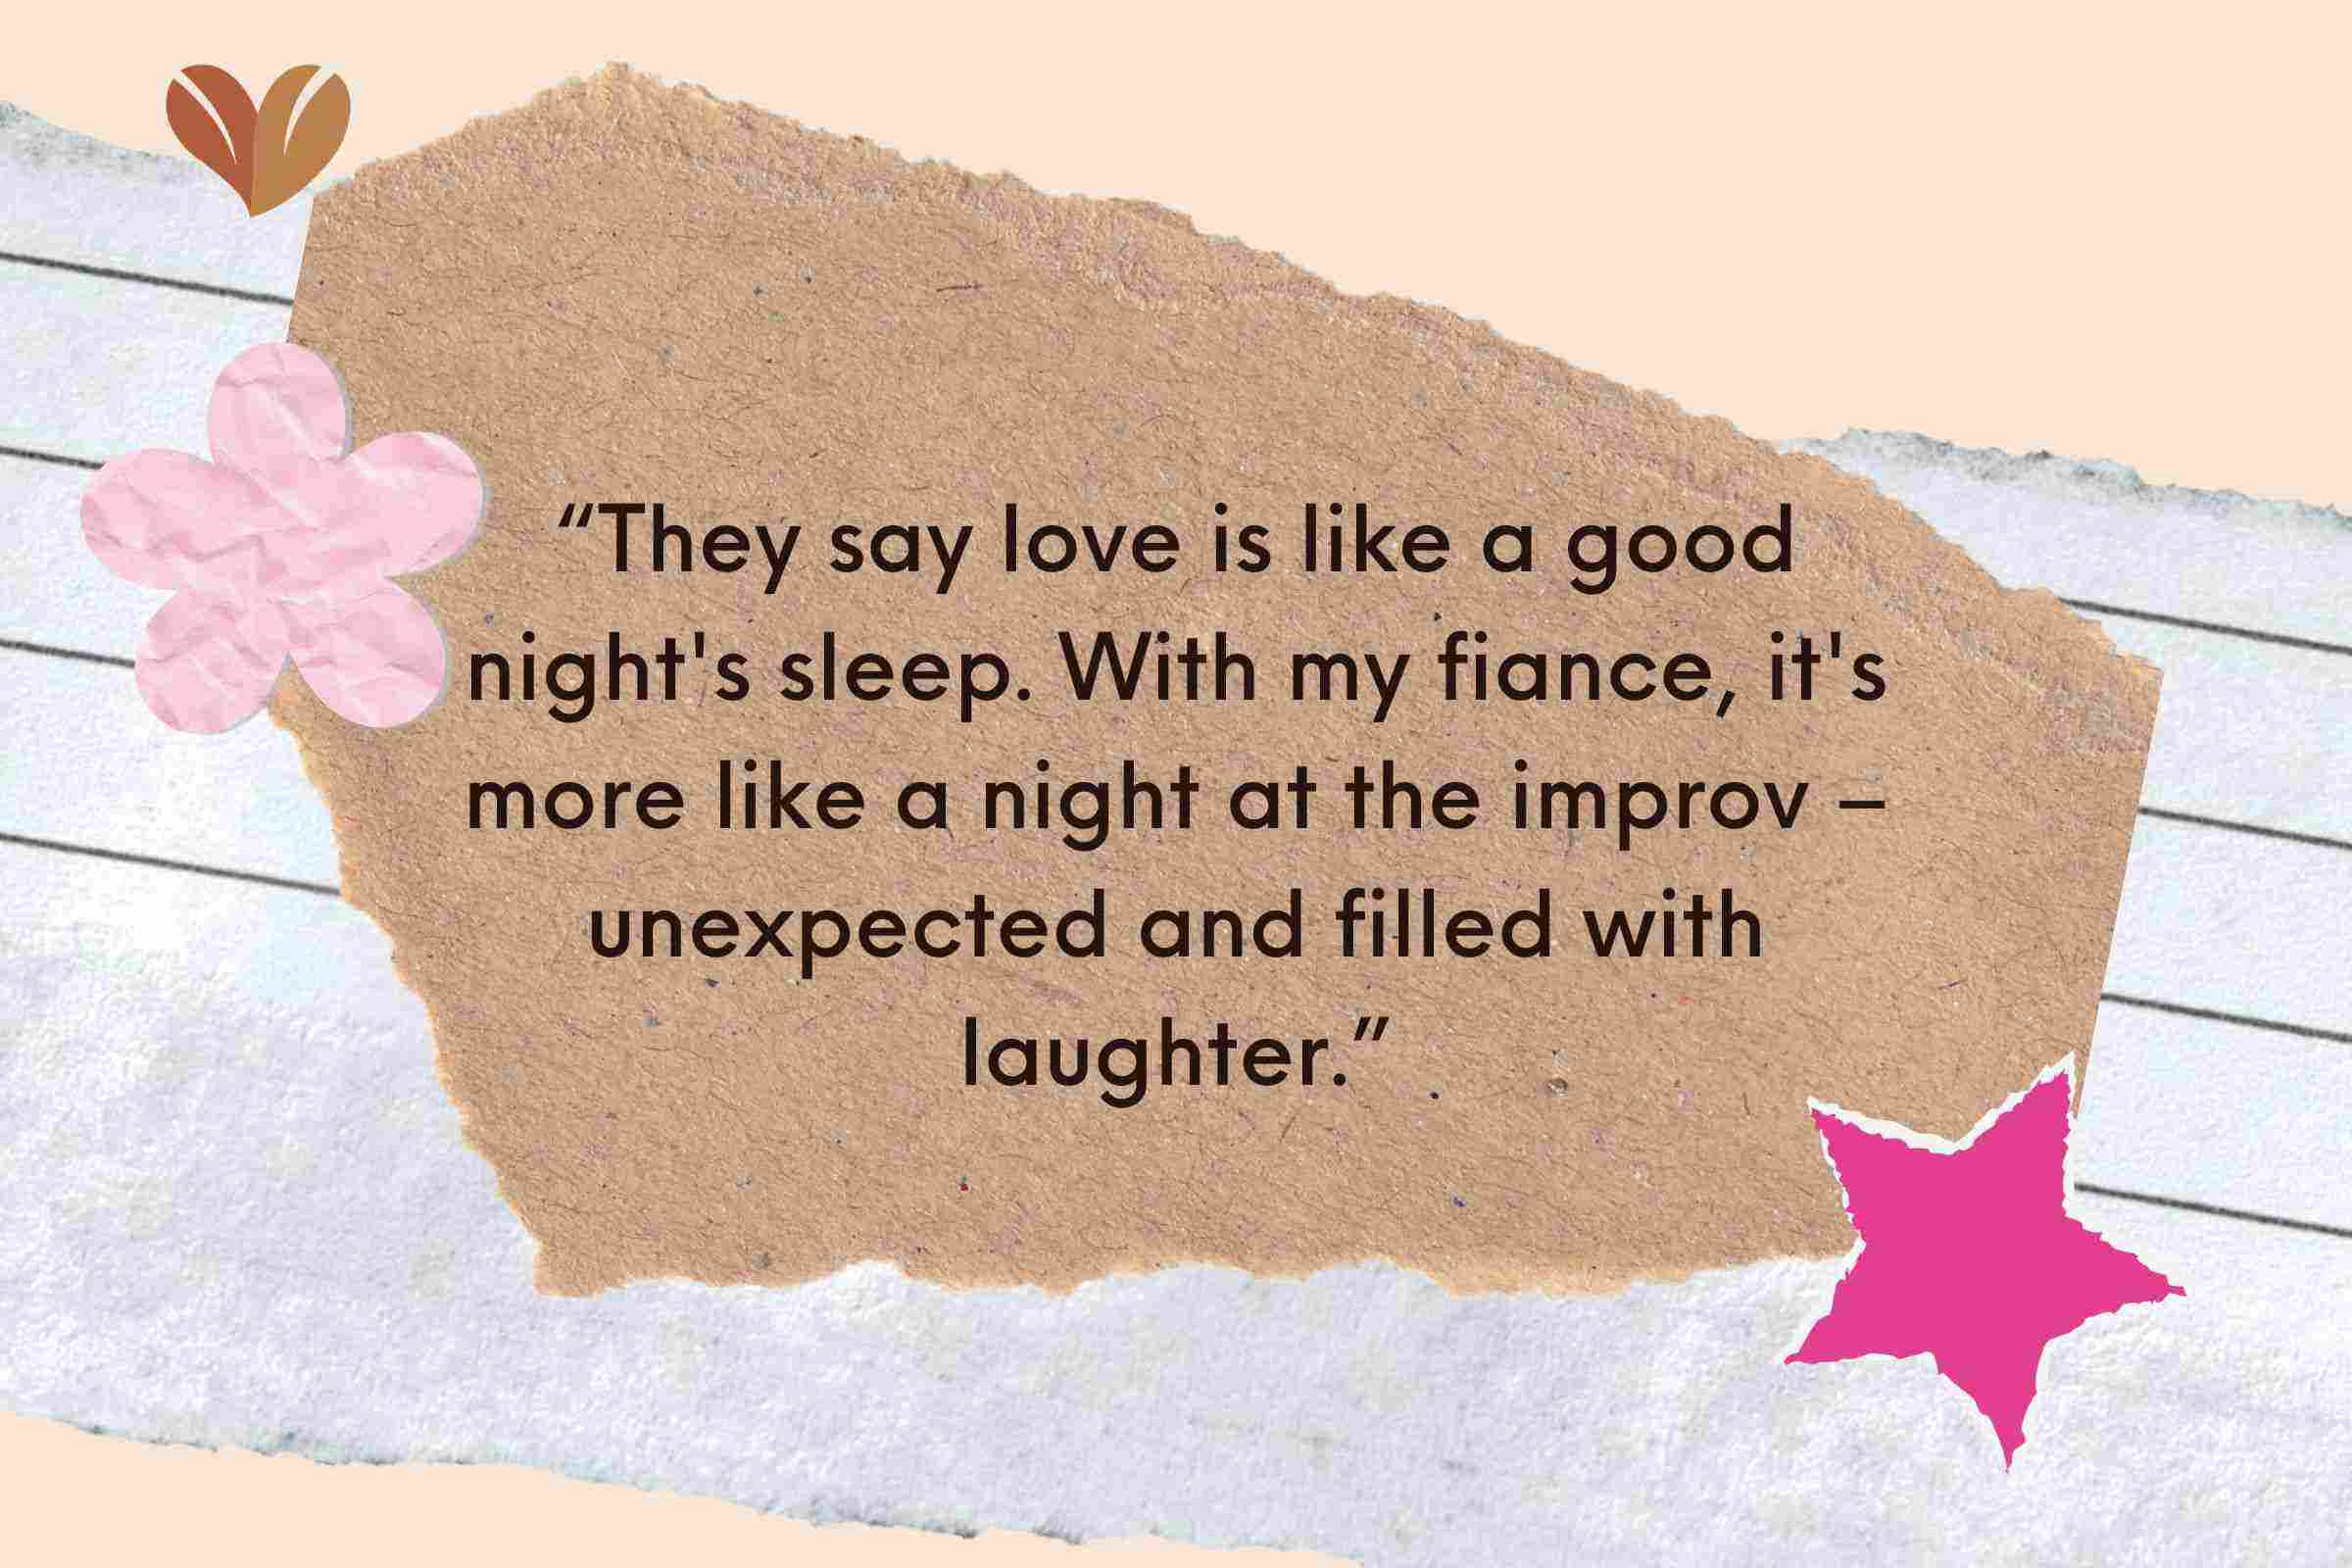 With my fiance, it's more like a night at the improv – unexpected and filled with laughter.